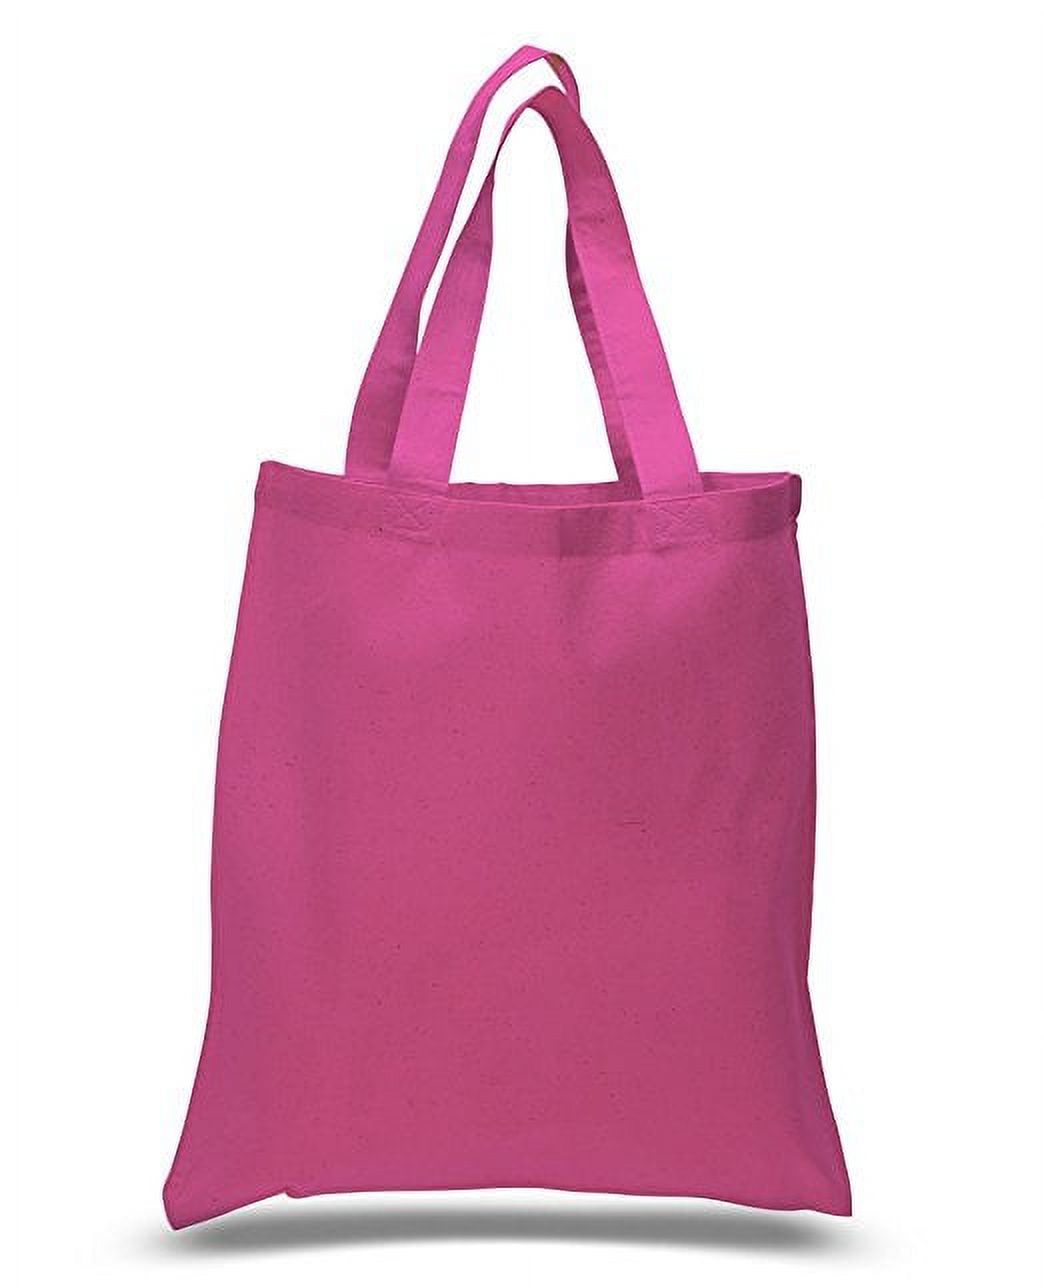 12pcs 100% Cotton Canvas Reusable Grocery Shopping Tote Bags in Bulk - 15x16 (HotPink) - image 1 of 1